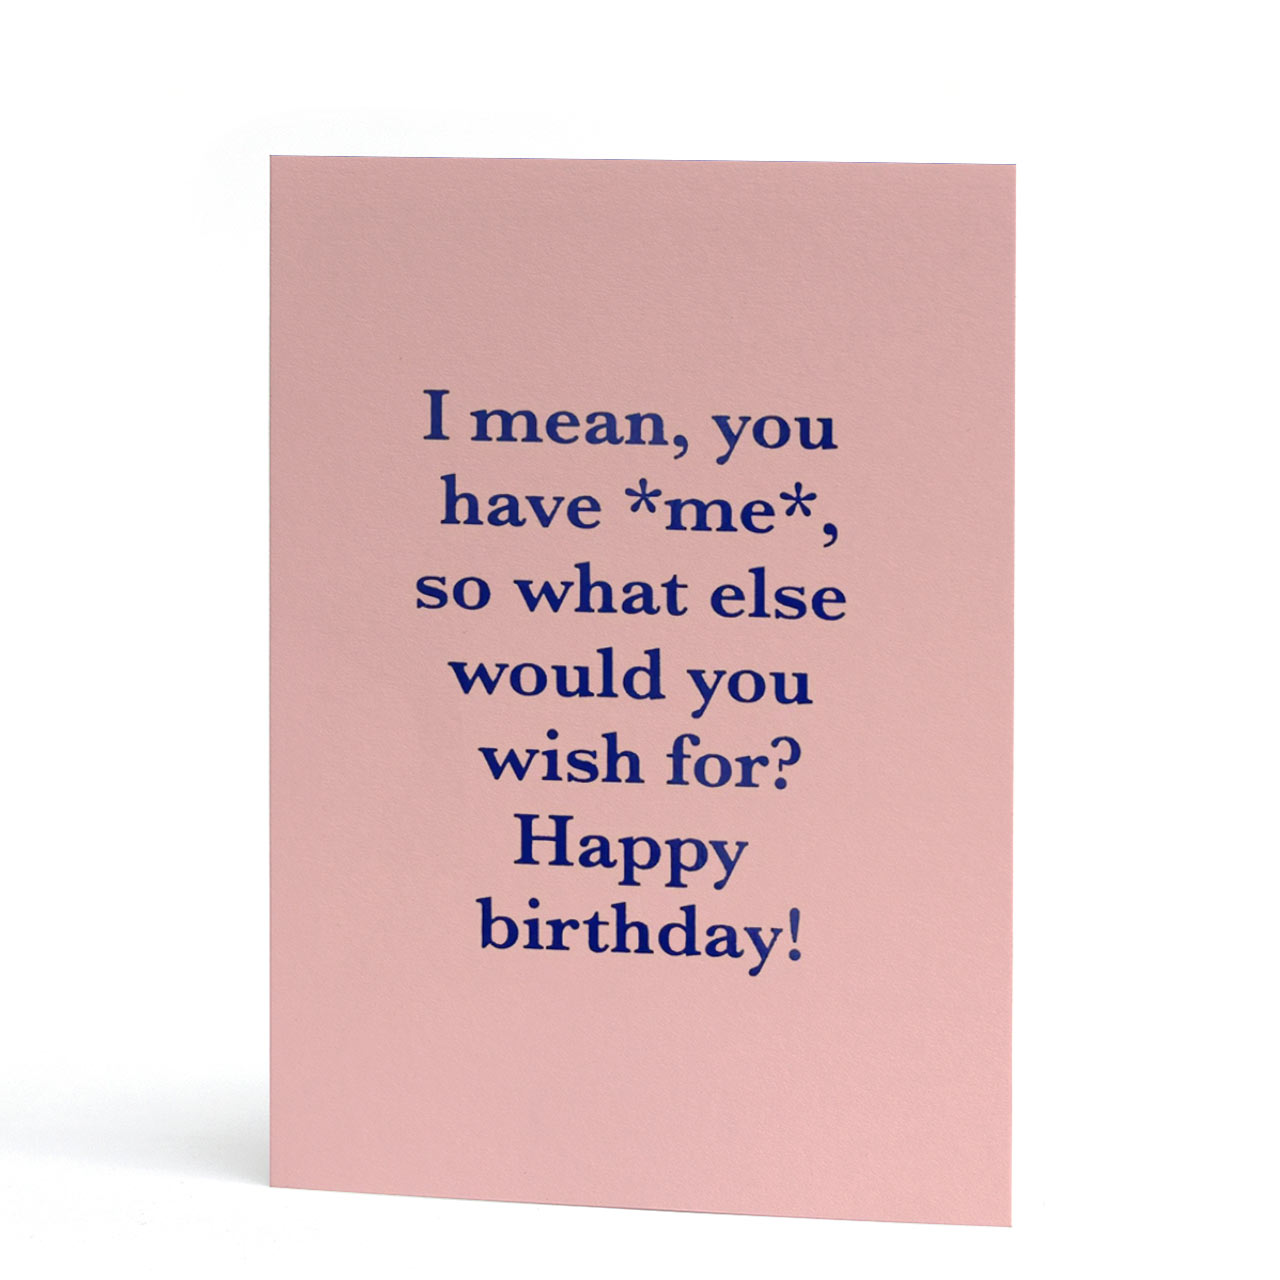 What Else Would You Wish For Blue Foil Birthday Card